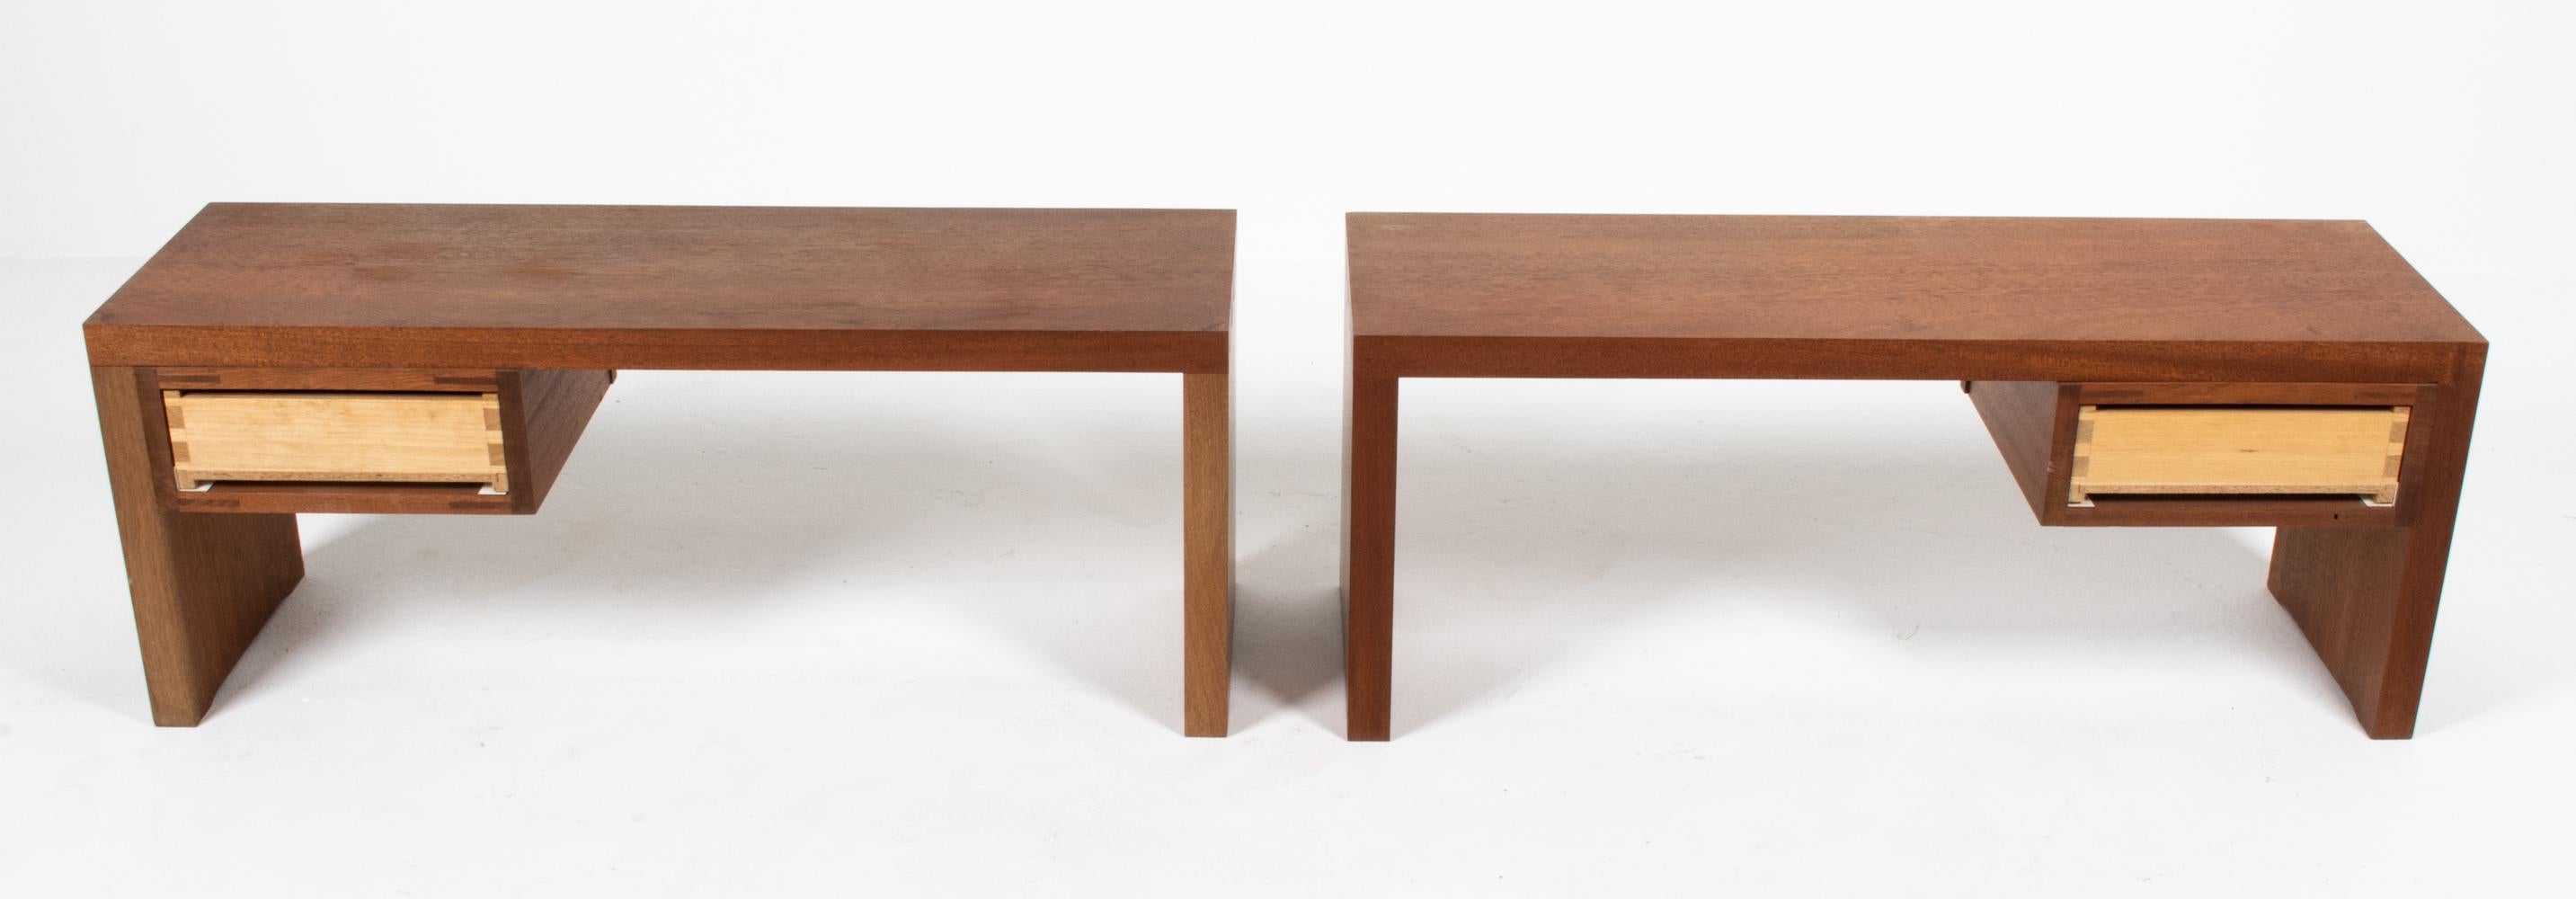 Pair of Mid-Century Modern Dovetailed Teak Nightstands or Benches For Sale 7